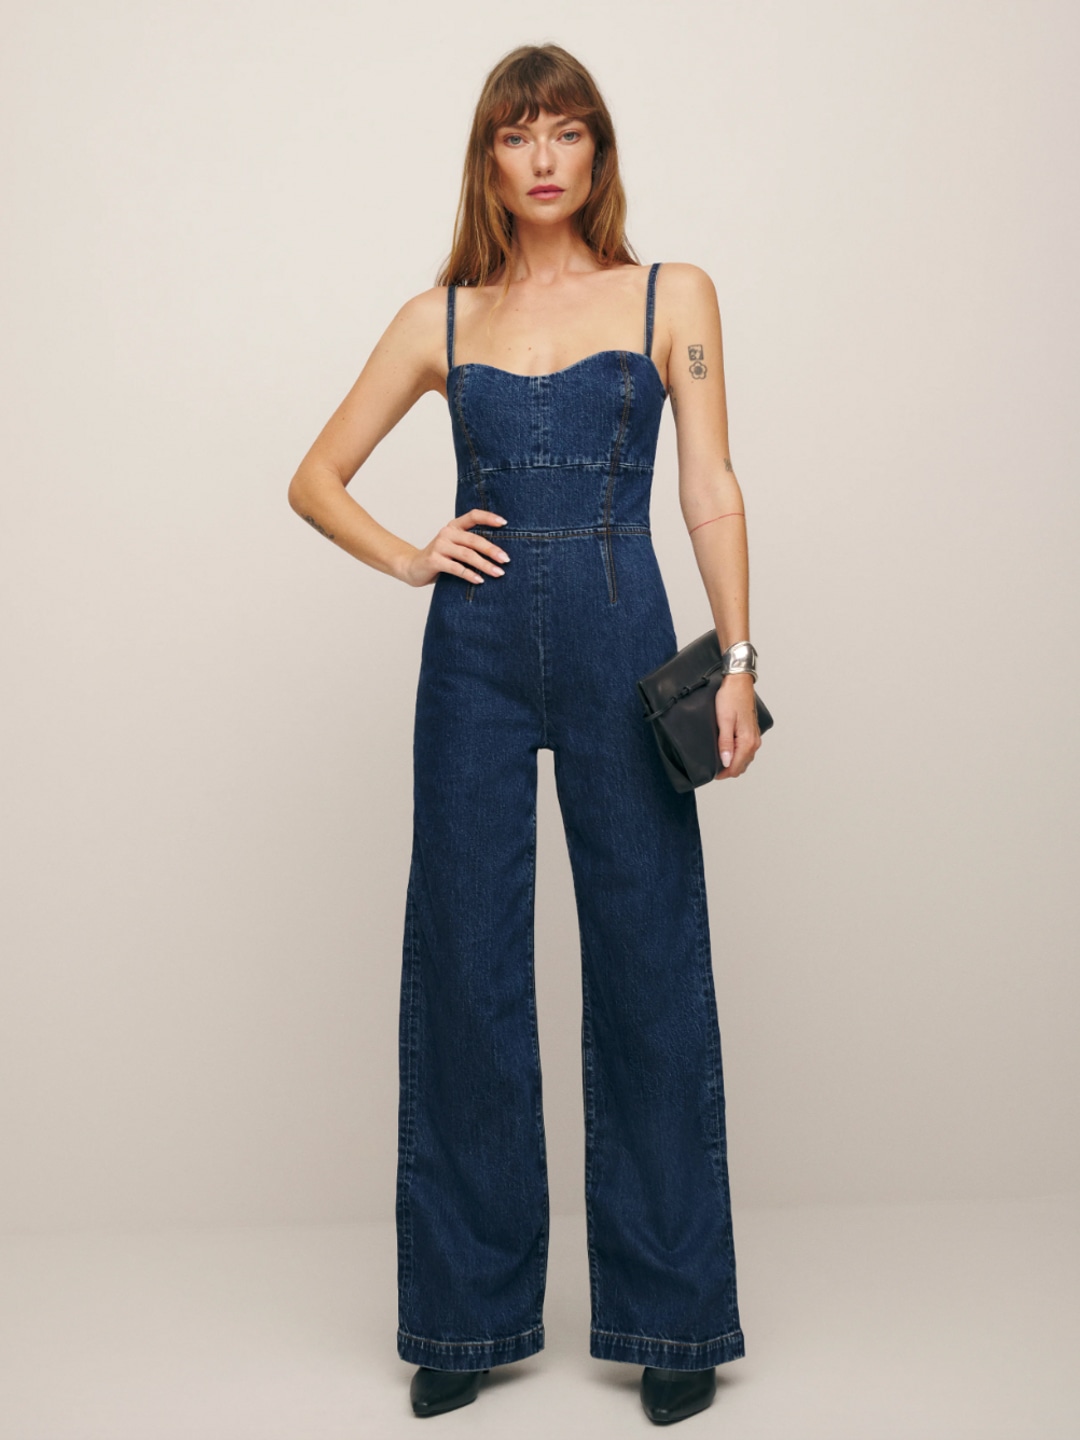 The 10 best denim jumpsuits to wear on rotation this season | HELLO!